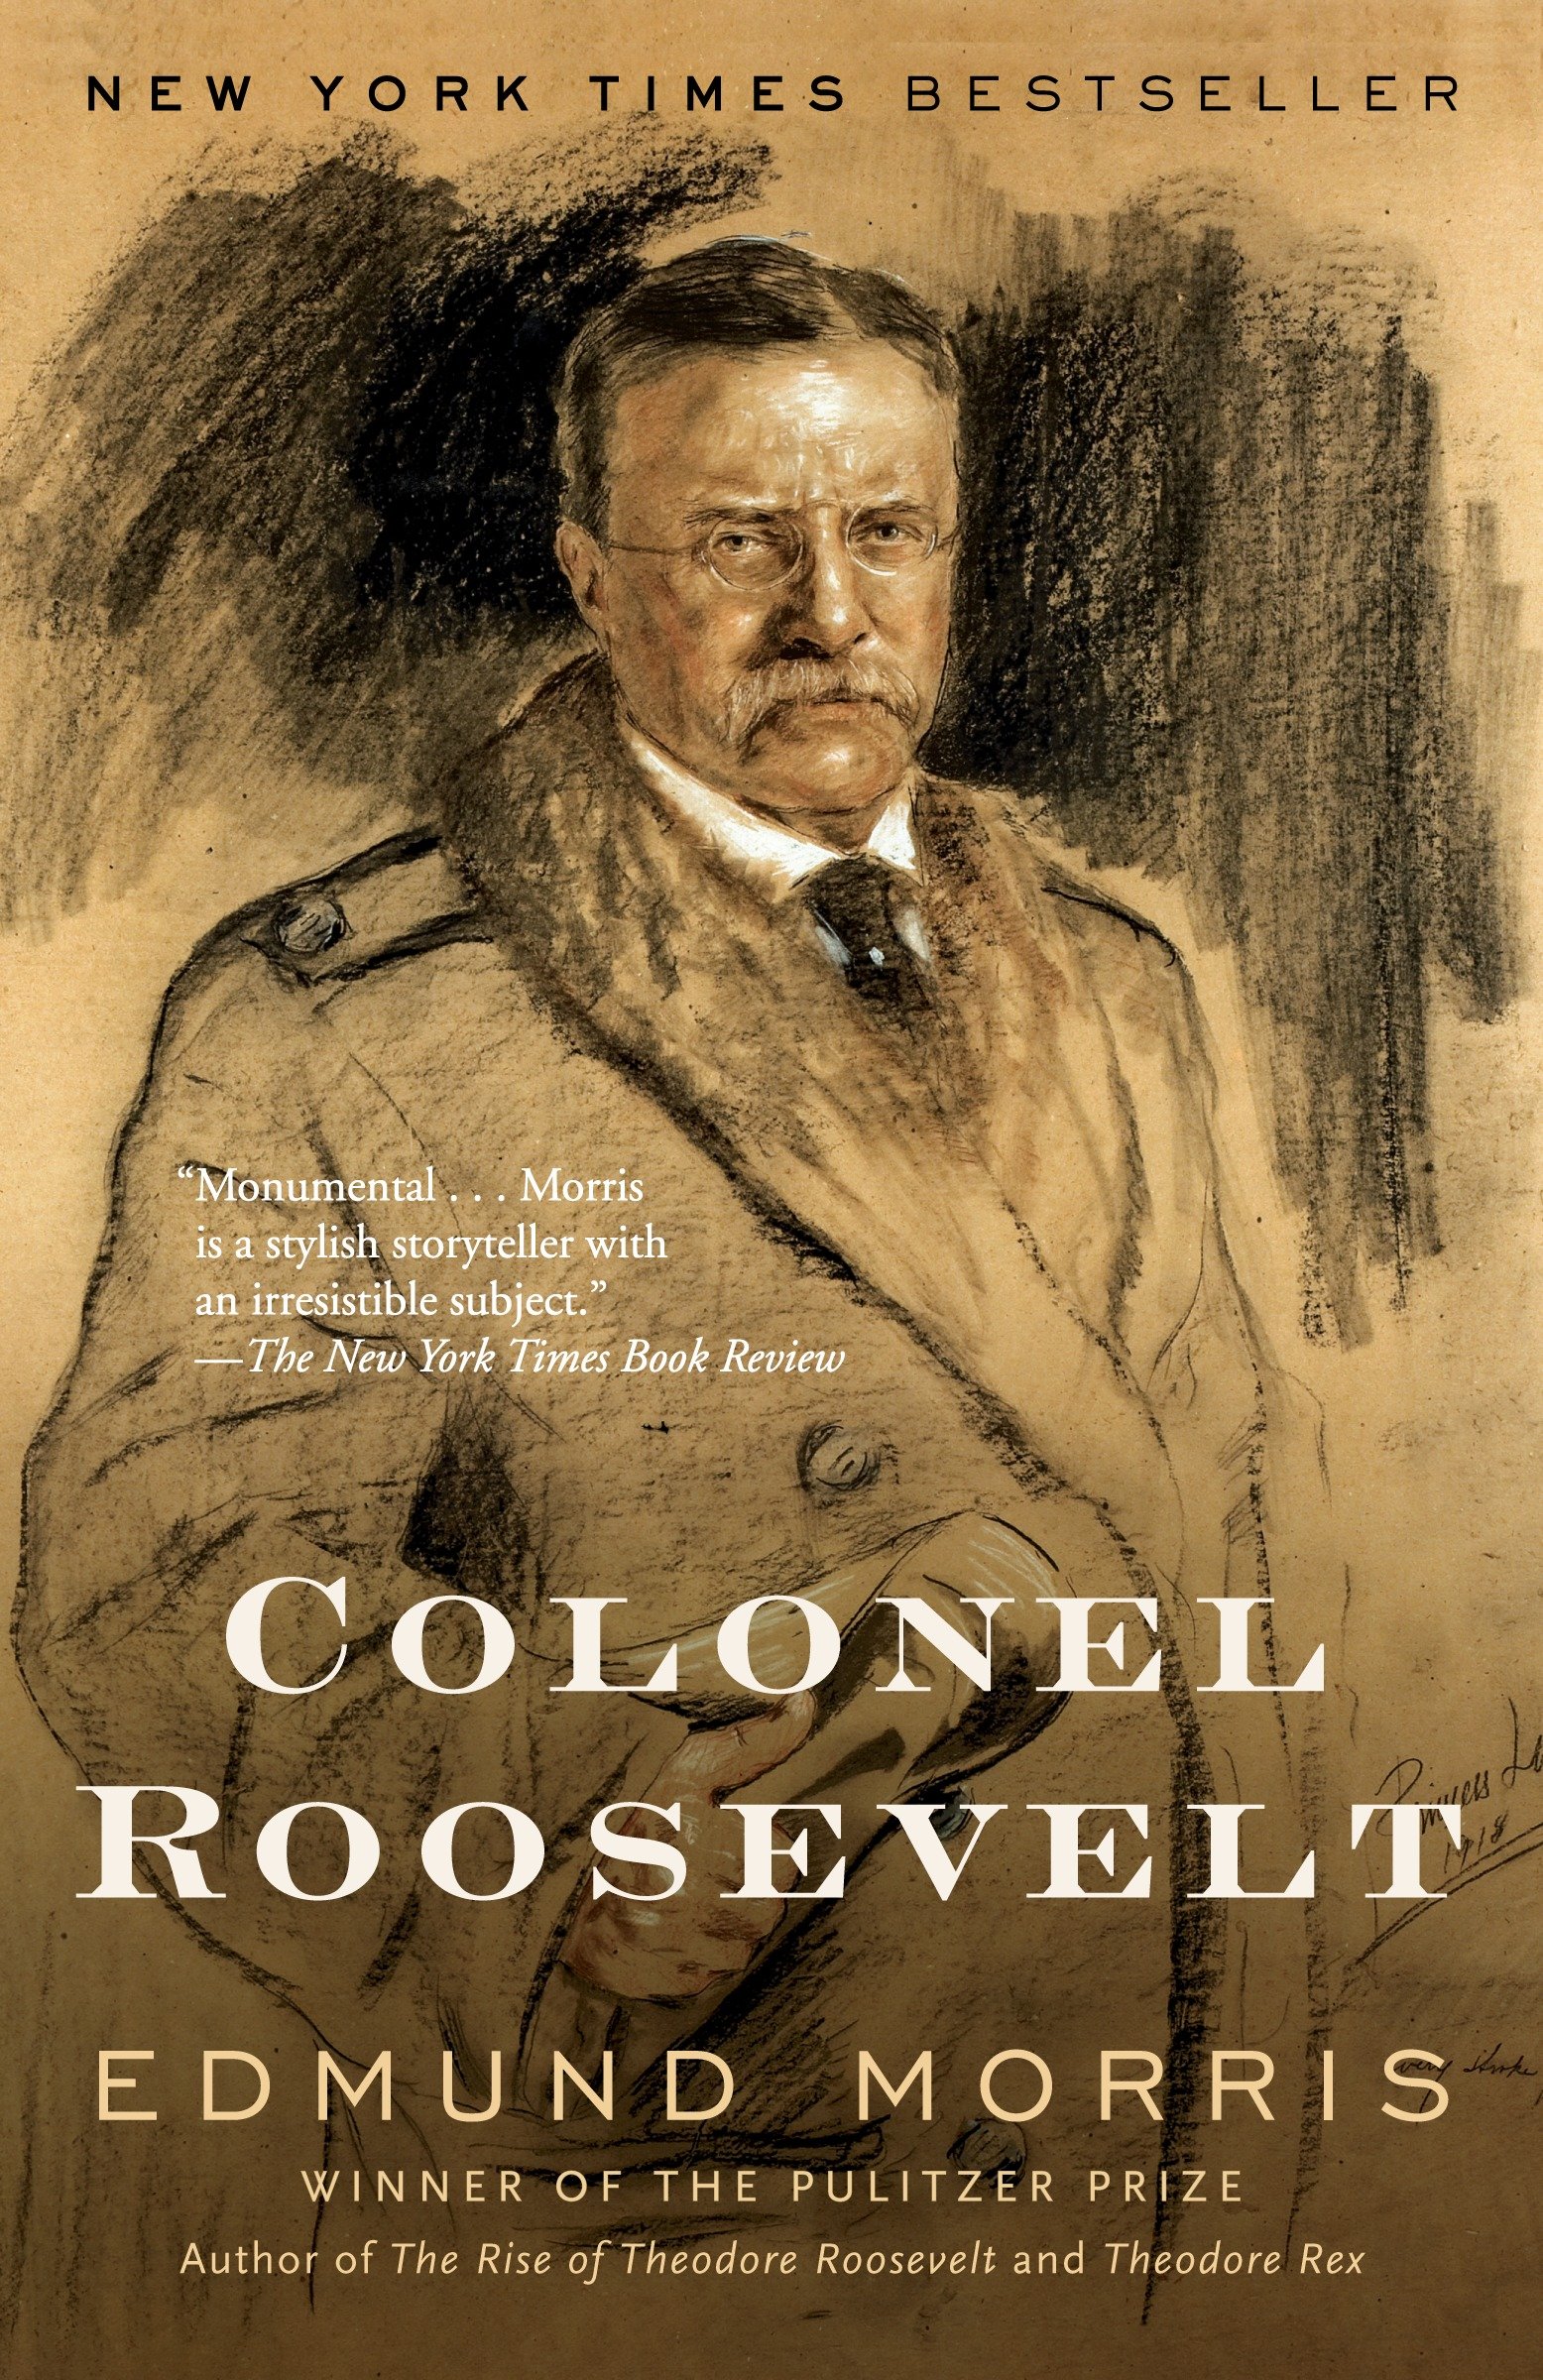 Colonel Roosevelt cover image